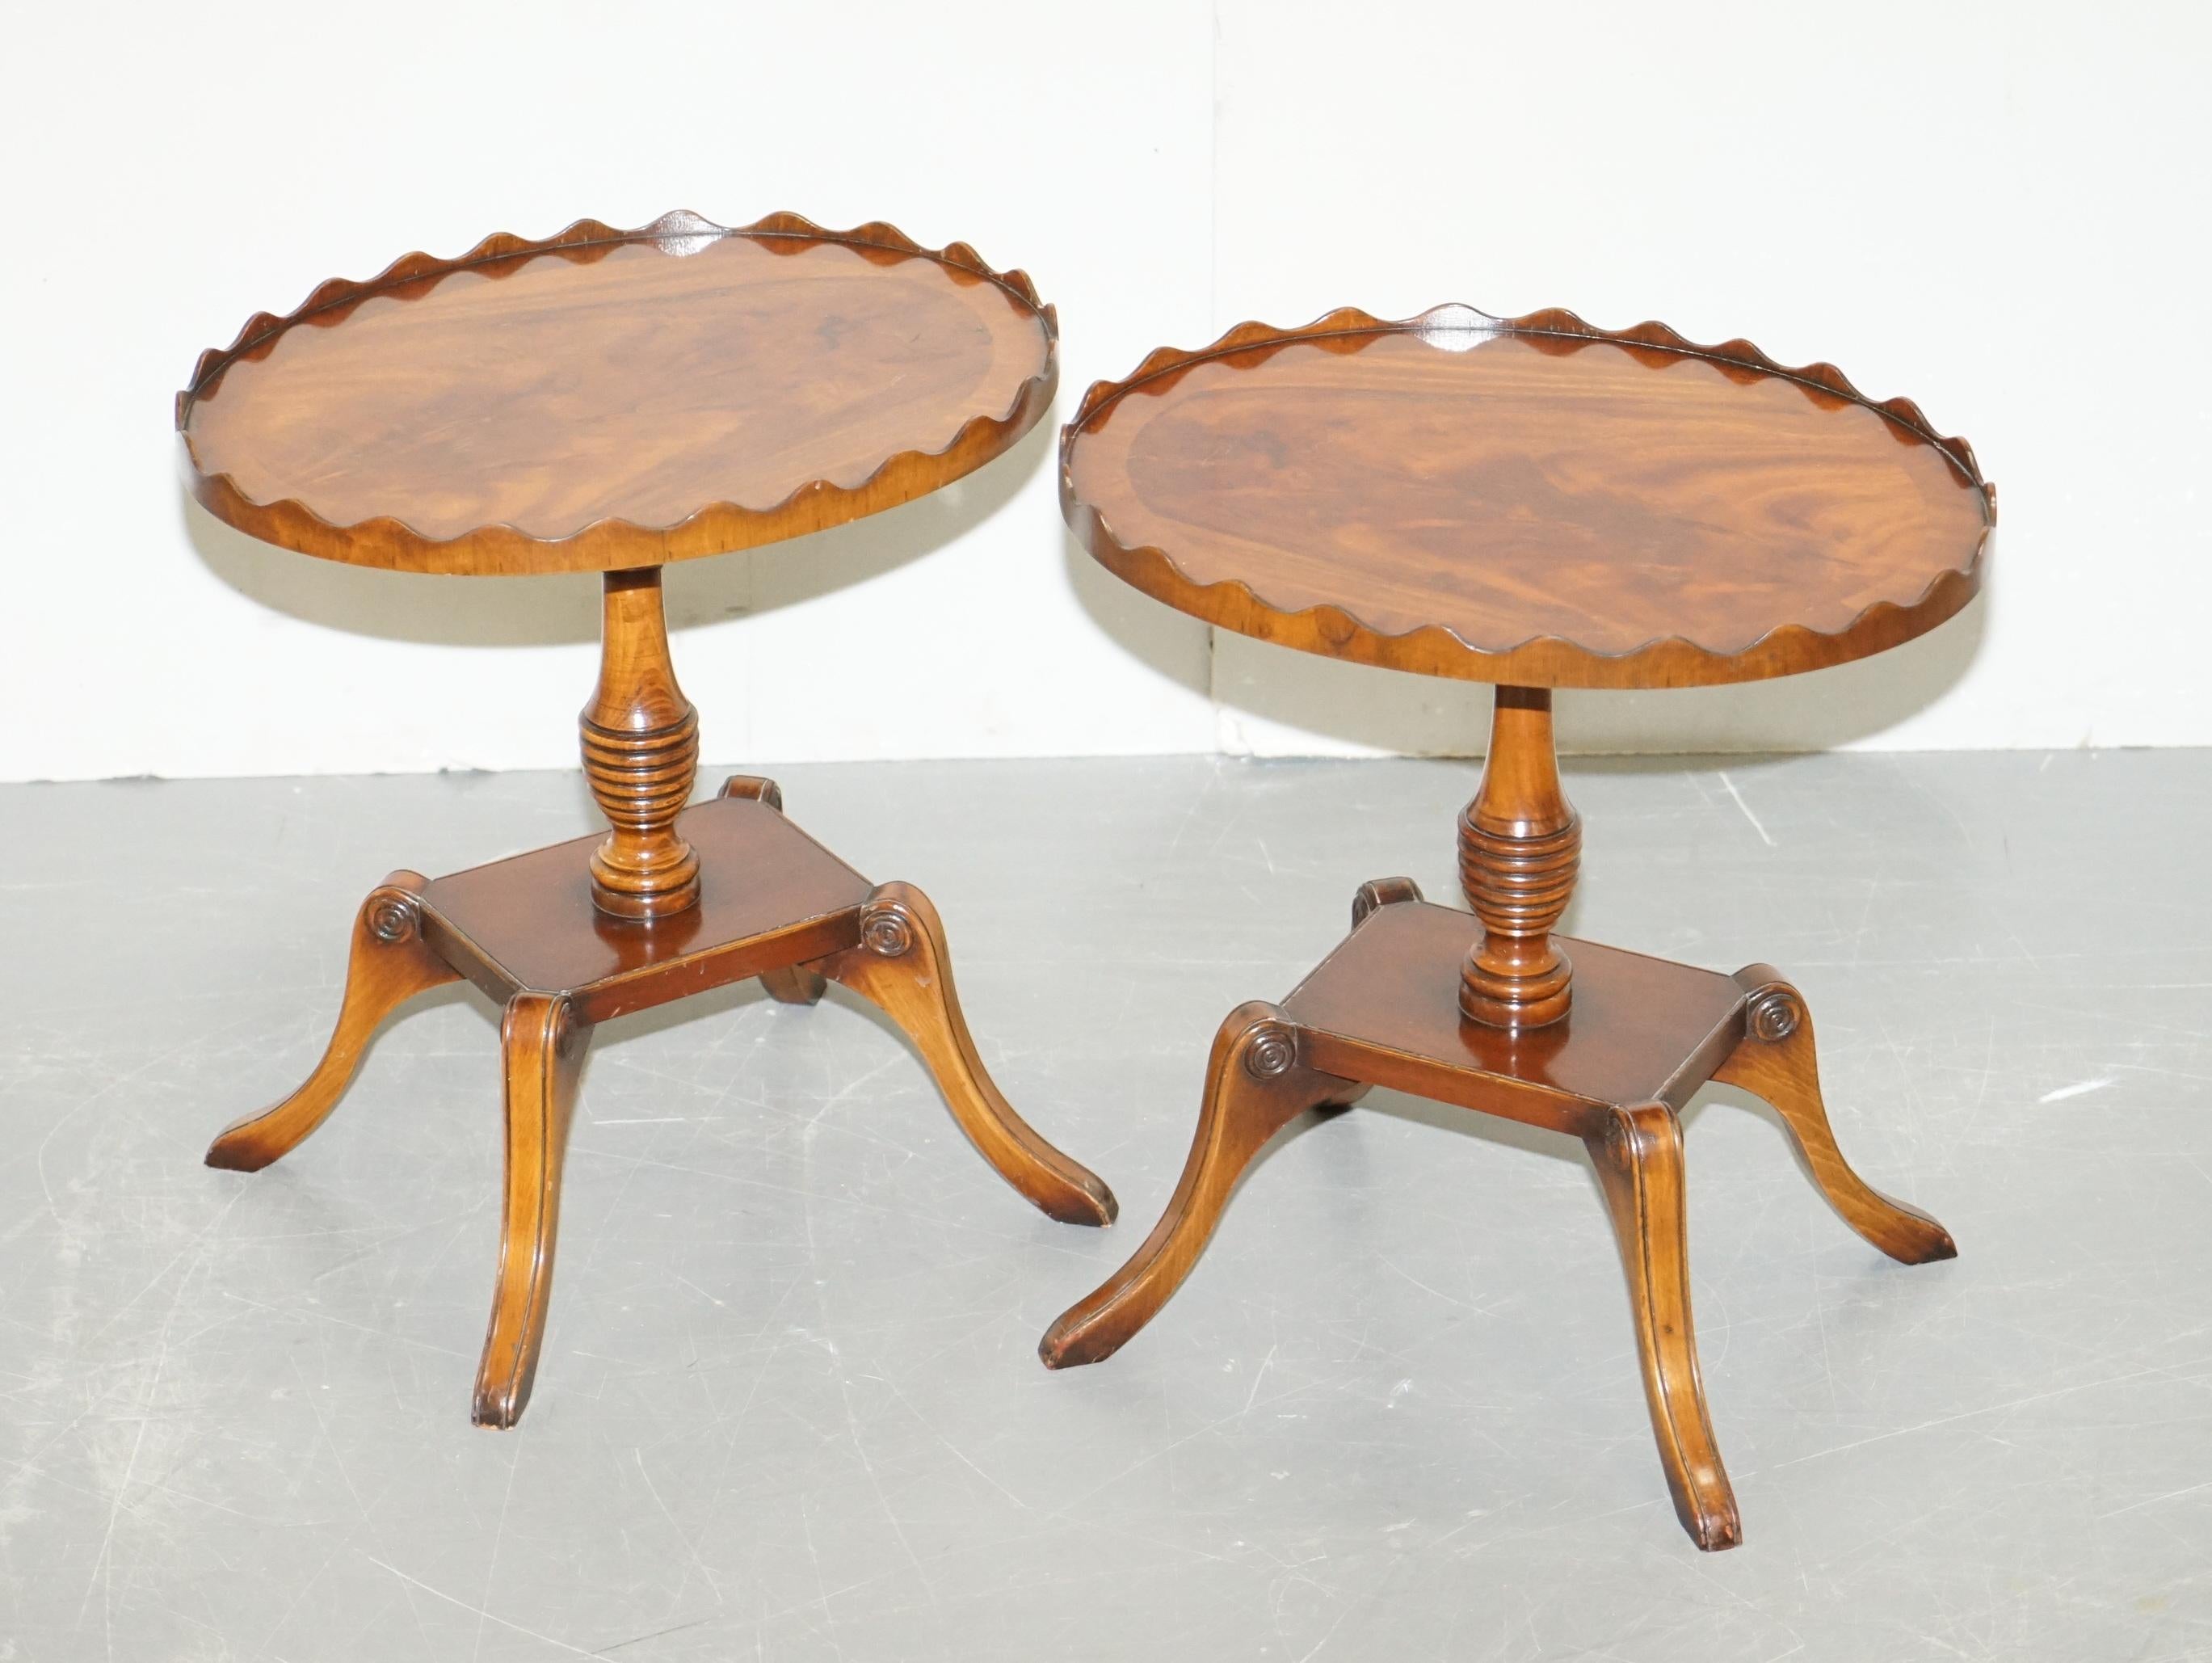 We are delighted to this stunning pair of vintage mahogany oval side tables with glorious flamed mahogany tops surmounted by carved gallery rails

An exquisite looking and very well made pair. These are some of the most ornate and decorative side